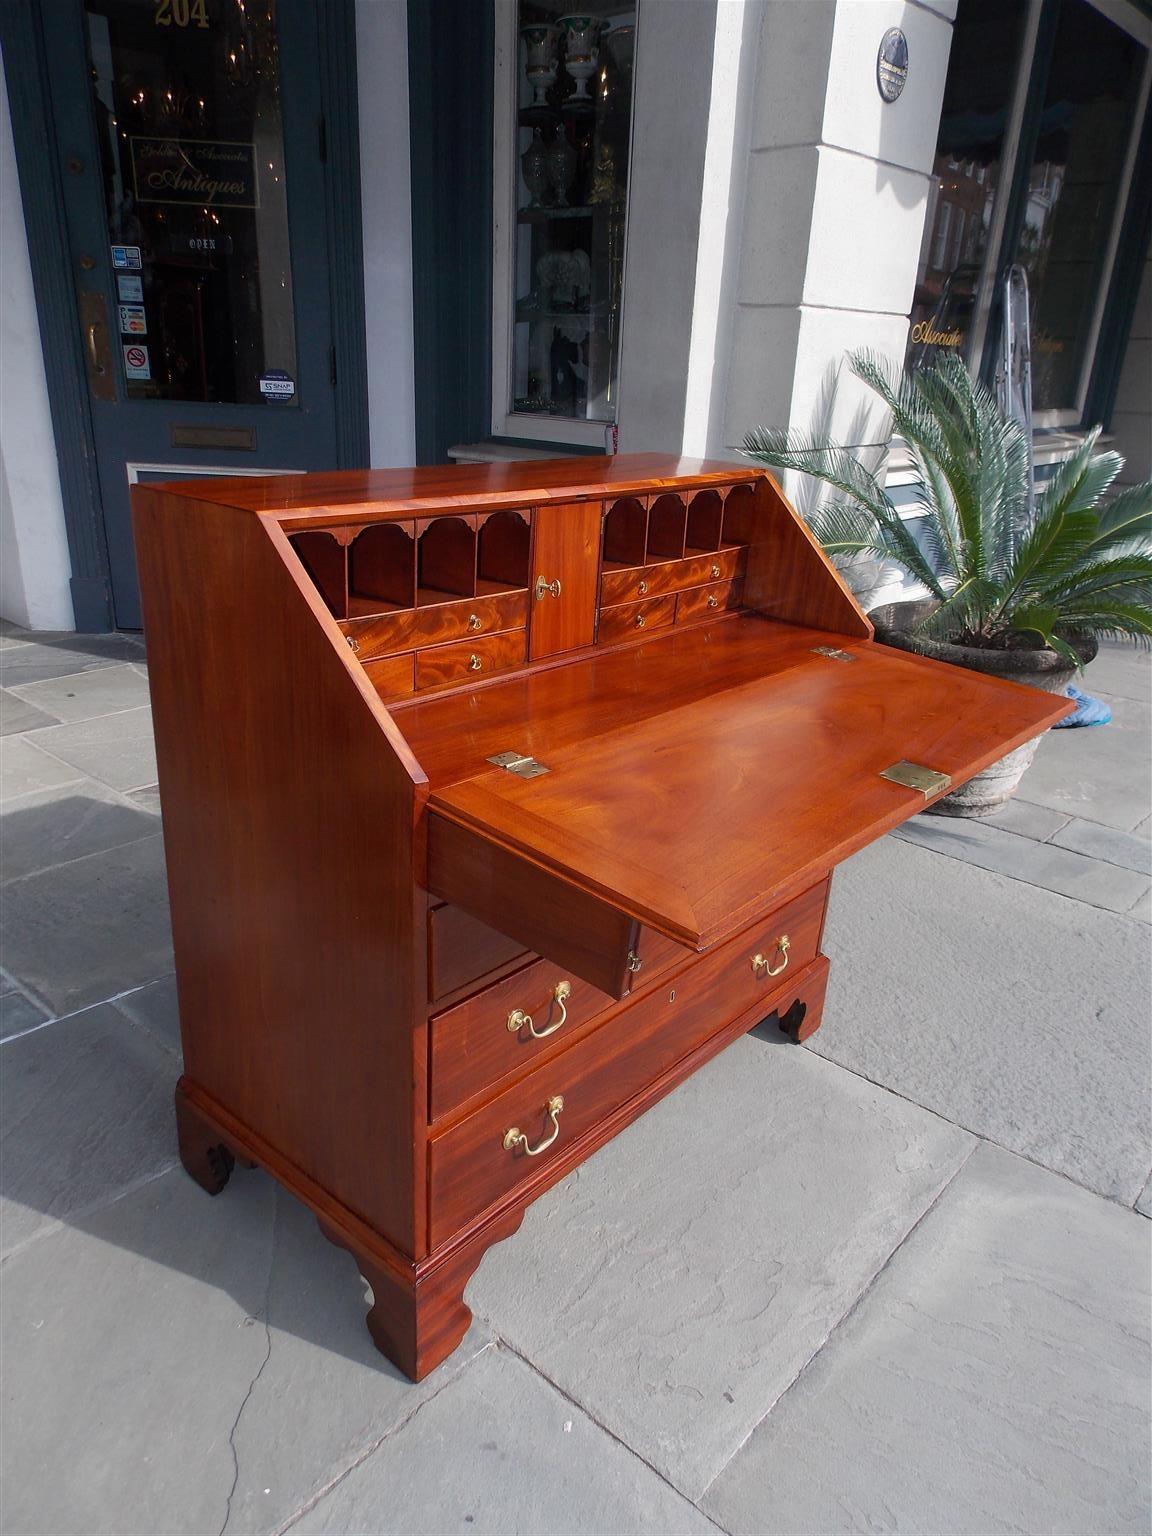 Late 18th Century Charleston Chippendale Mahogany Slant Top Desk with Fitted Interior, C. 1770 For Sale